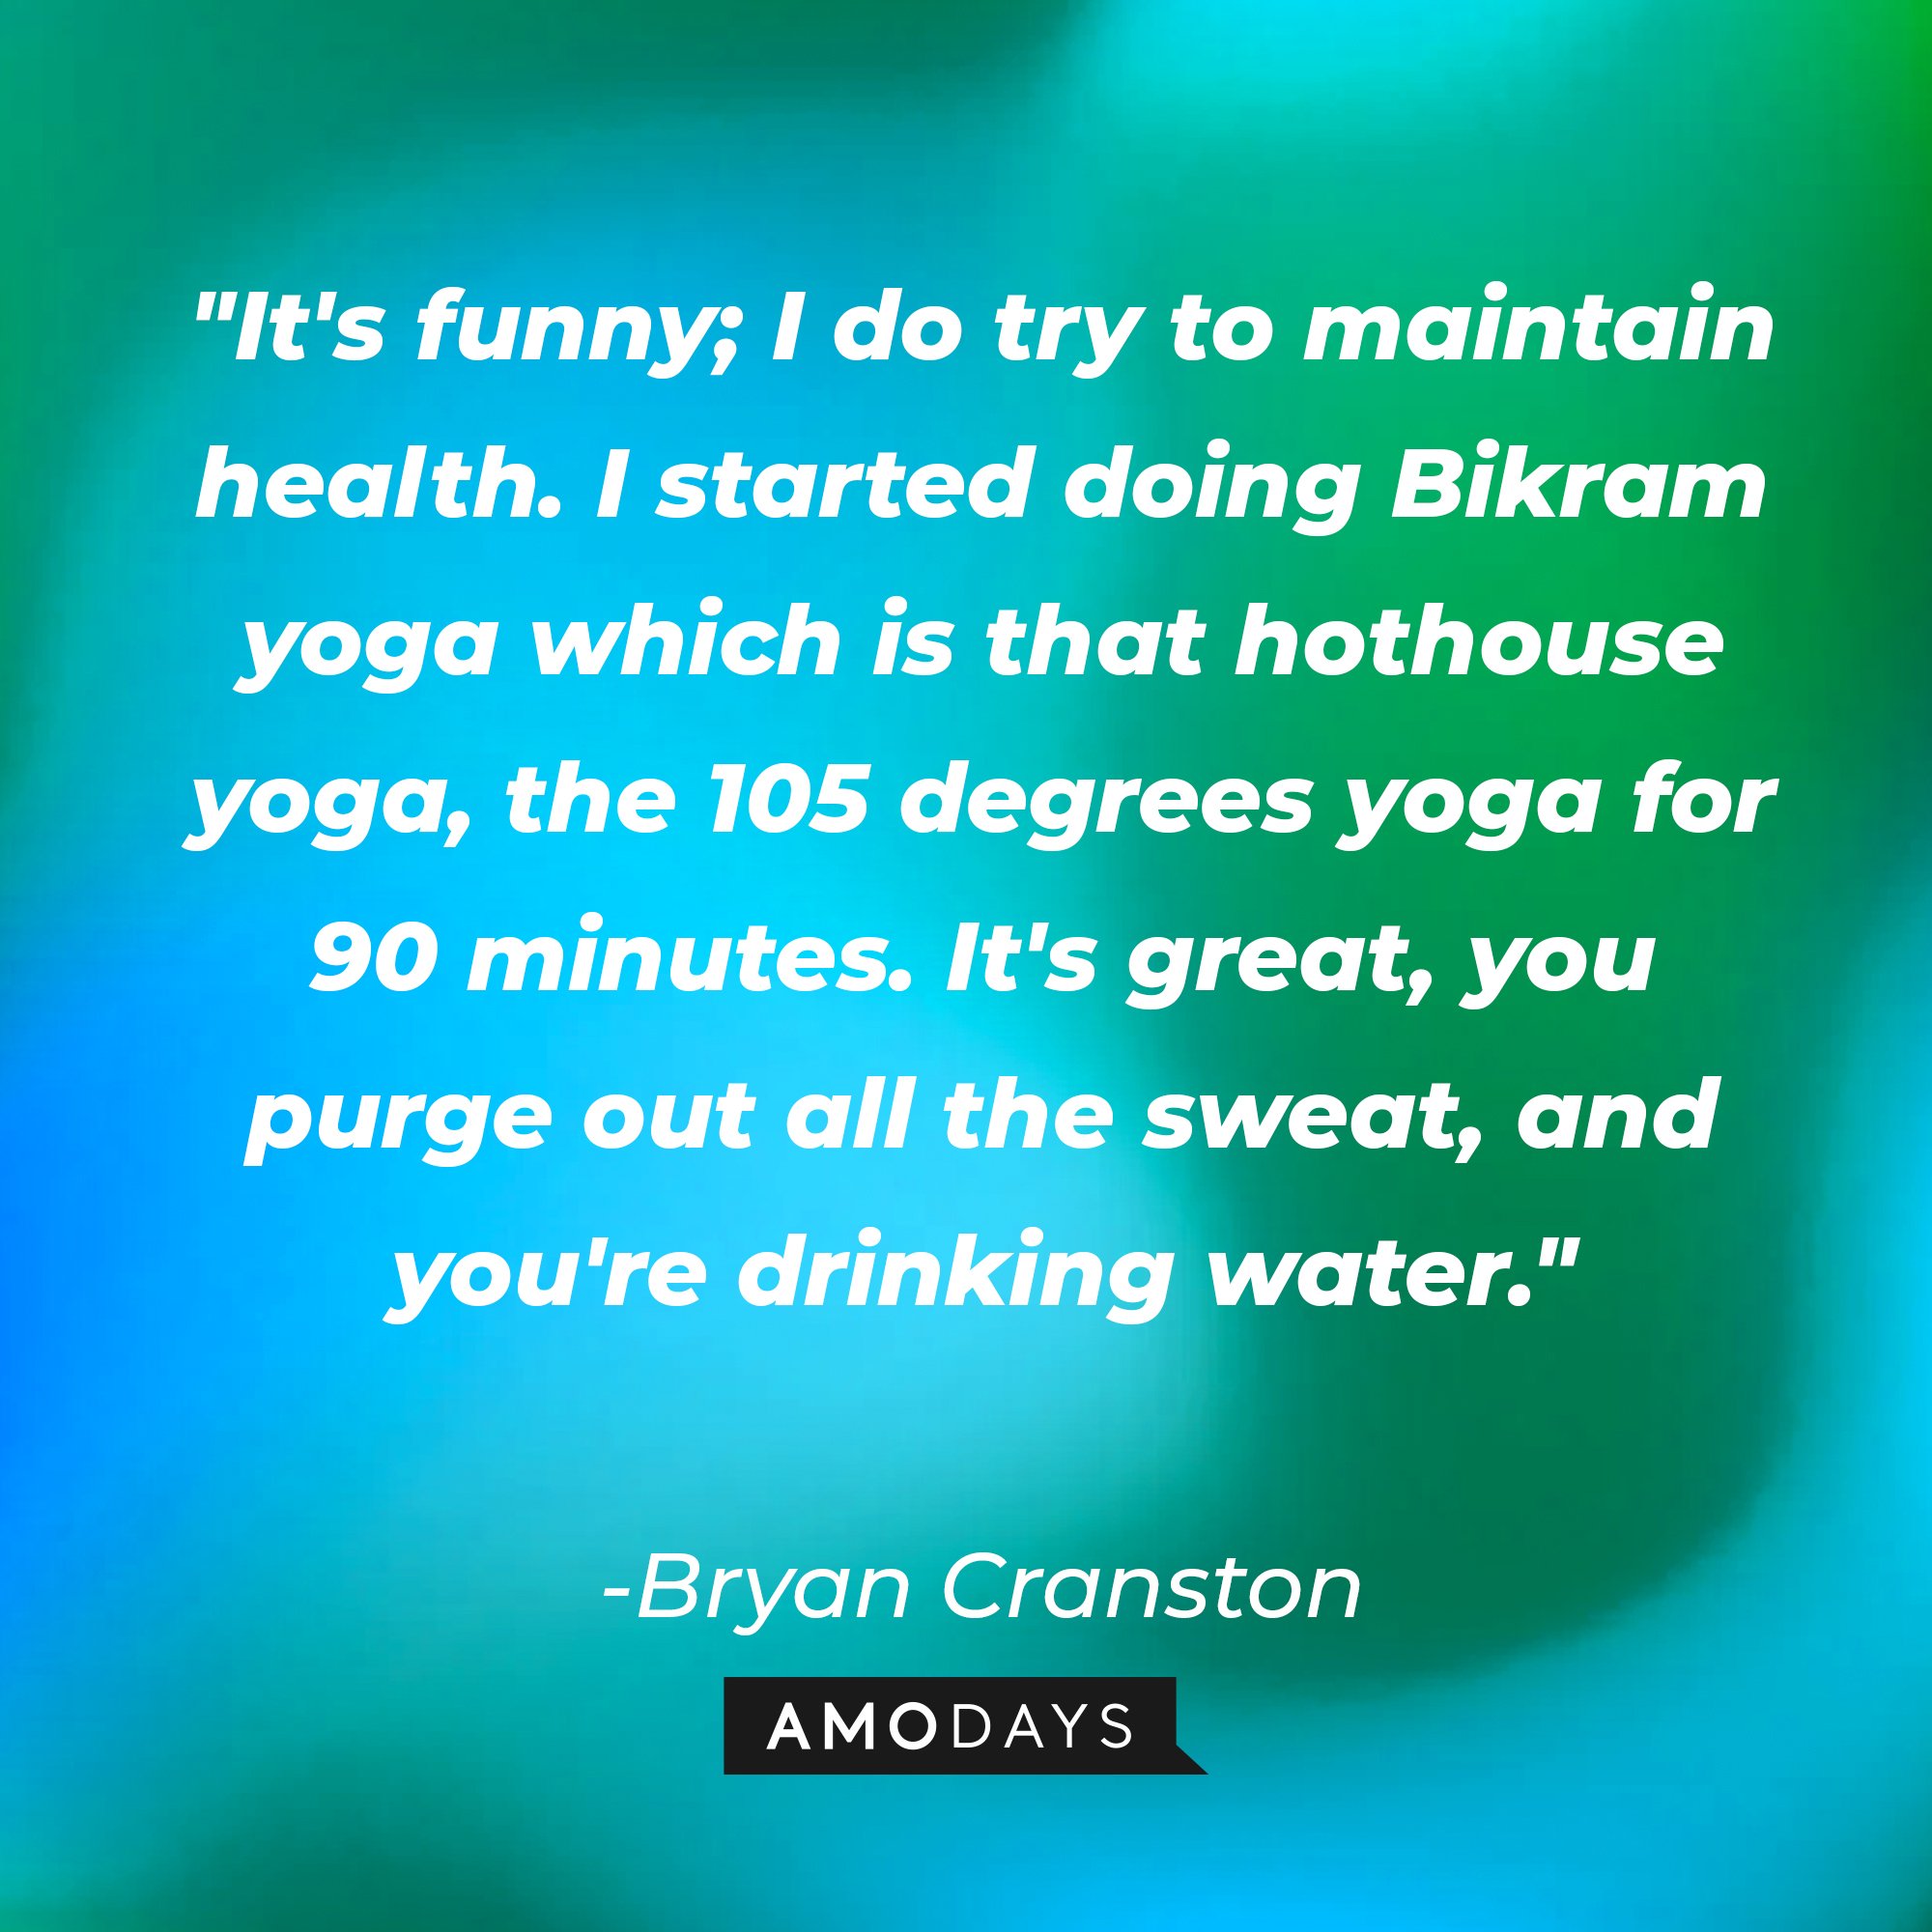 Bryan Cranston’s quote: "It's funny; I do try to maintain health. I started doing Bikram yoga which is that hothouse yoga, the 105 degrees yoga for 90 minutes. It's great, you purge out all the sweat, and you're drinking water." | Image: AmoDays  